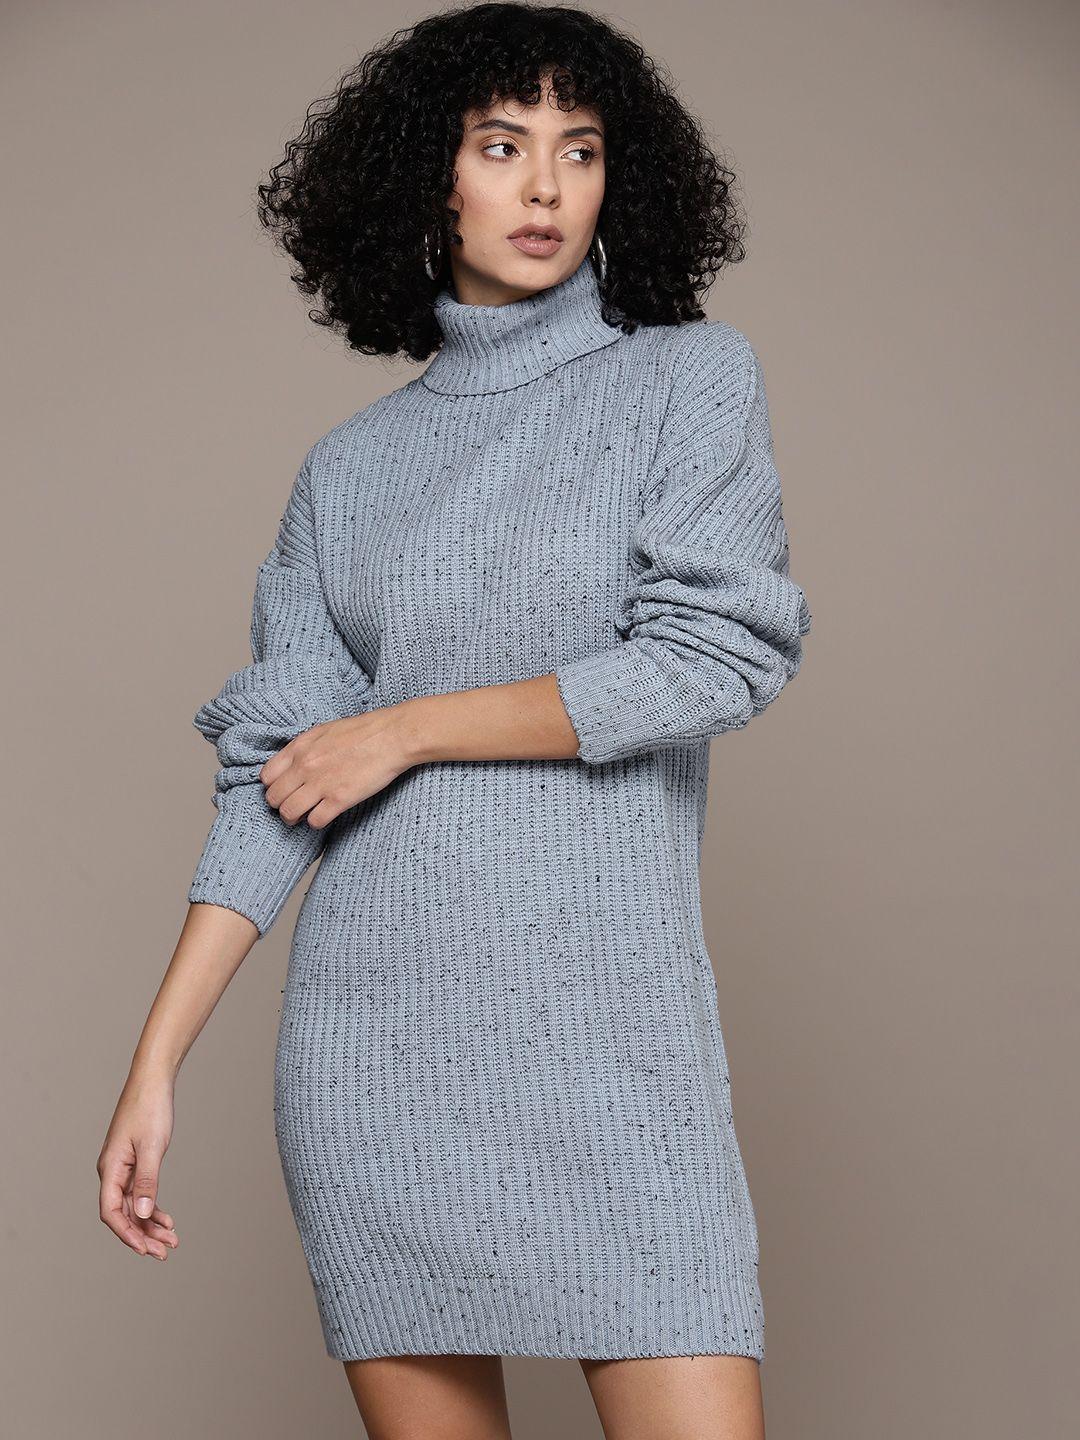 the roadster lifestyle co. acrylic ribbed knitted sweater dress